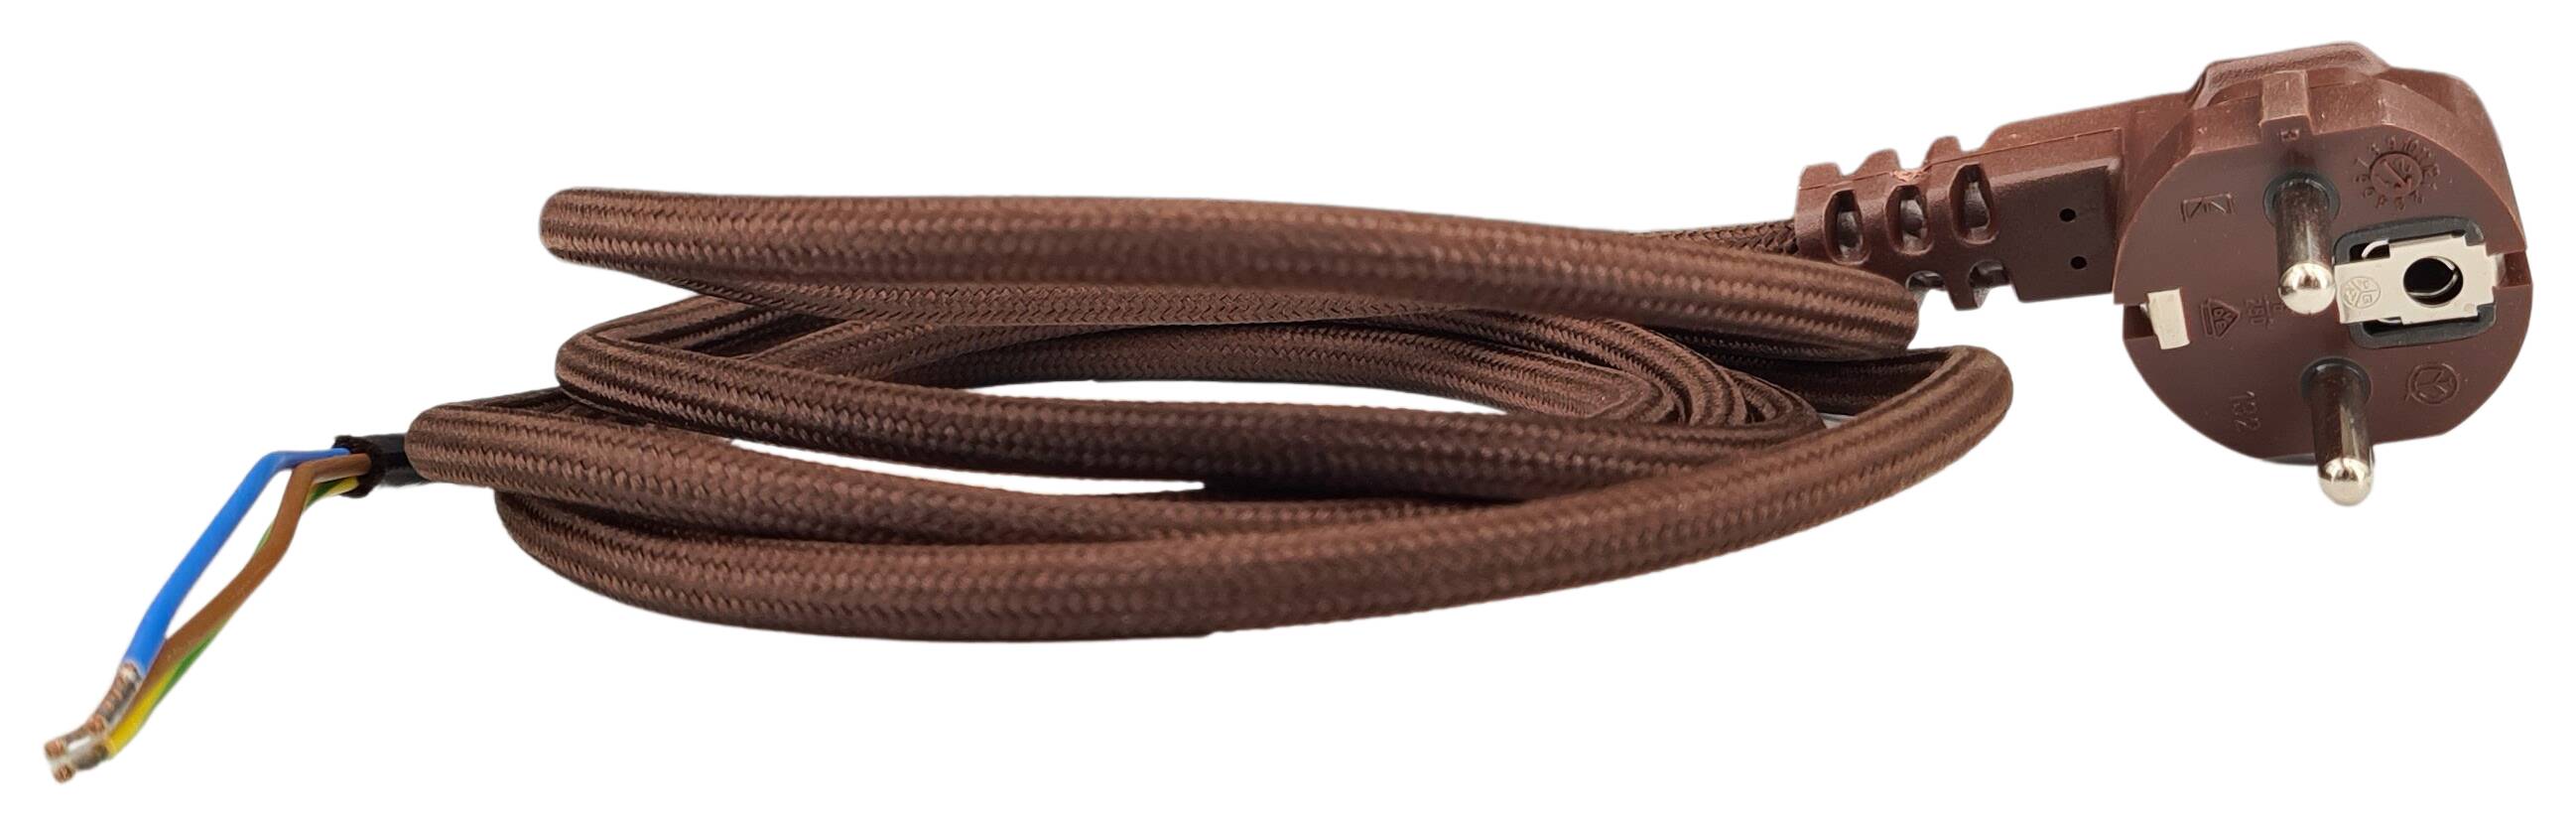 cable section 3G 0,75 H03VV-F textile braided 2500 mm 60/25 end sleeve color 285 brown